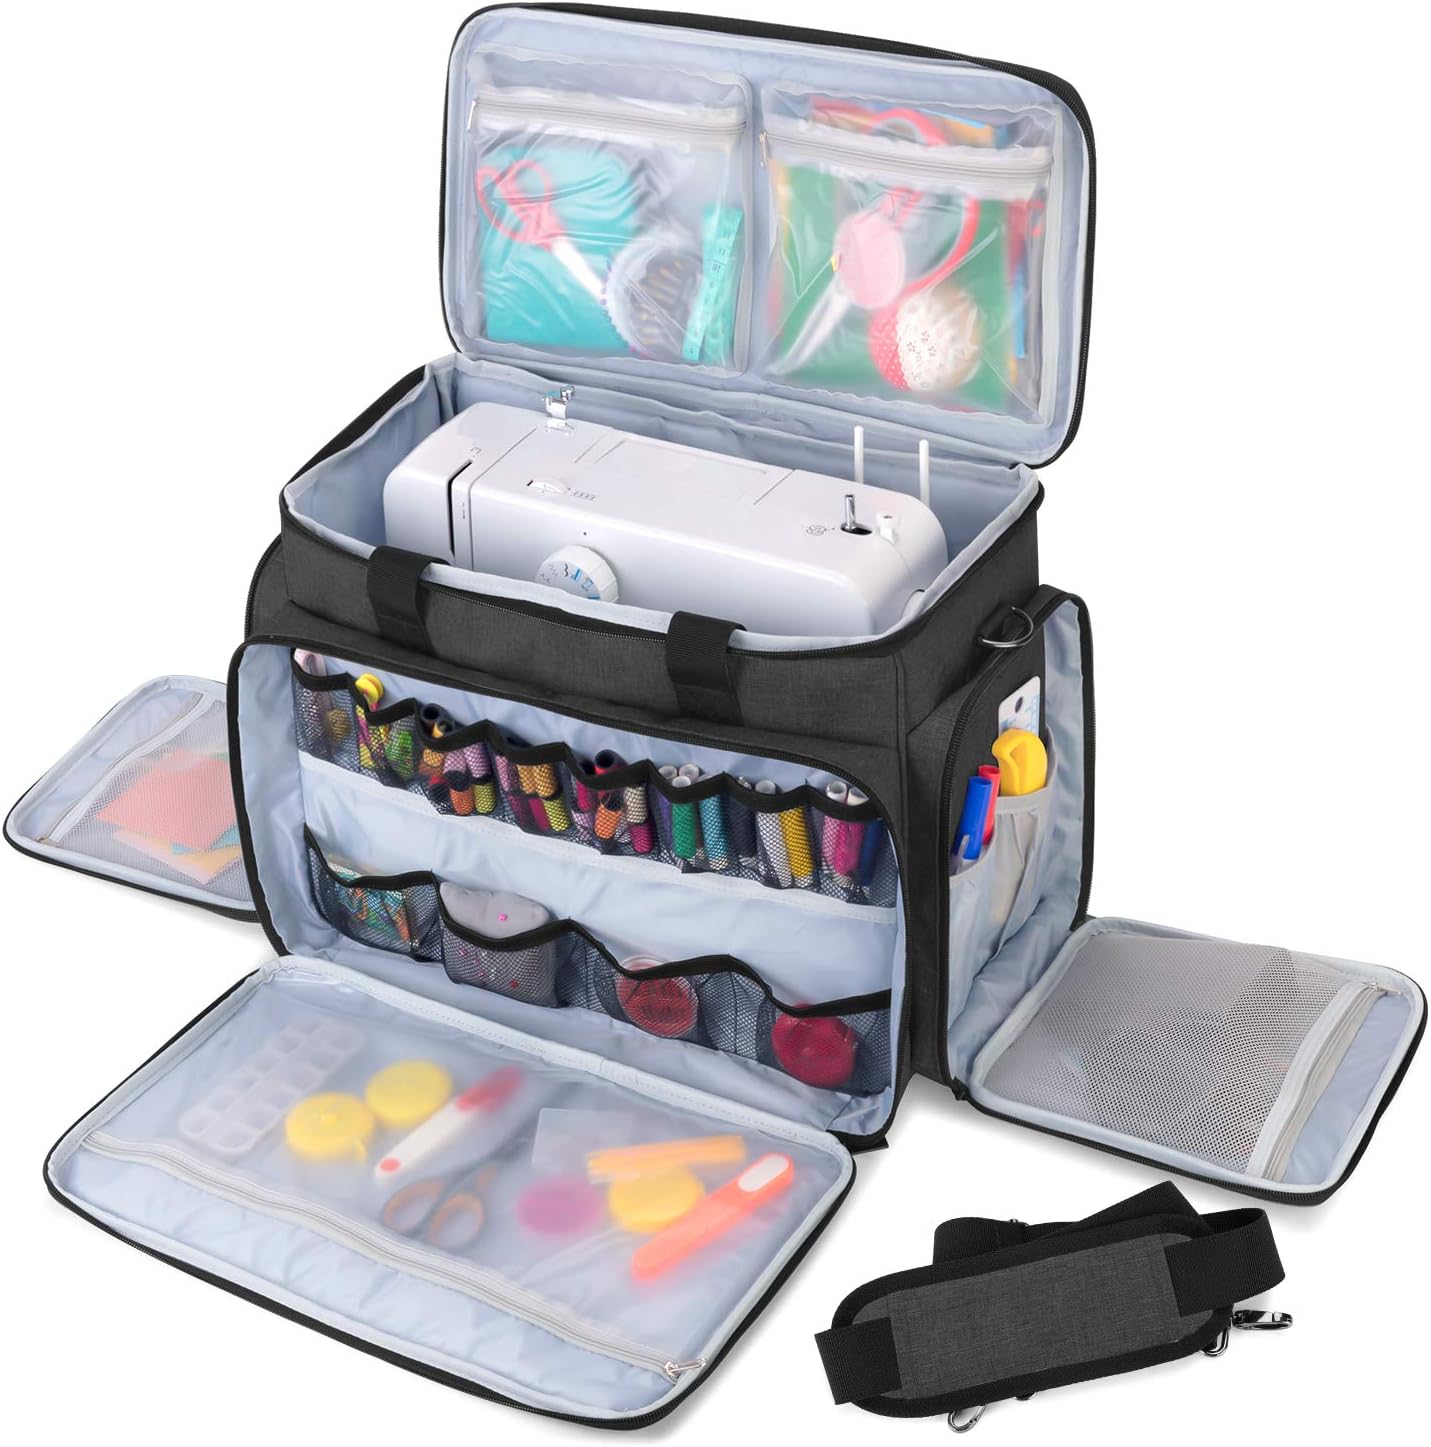 This was a terrific rolling case to take my Janome Quilters Companion machine to a quilt retreat. Really good quality case and lots of storage pockets for sewing supplies.